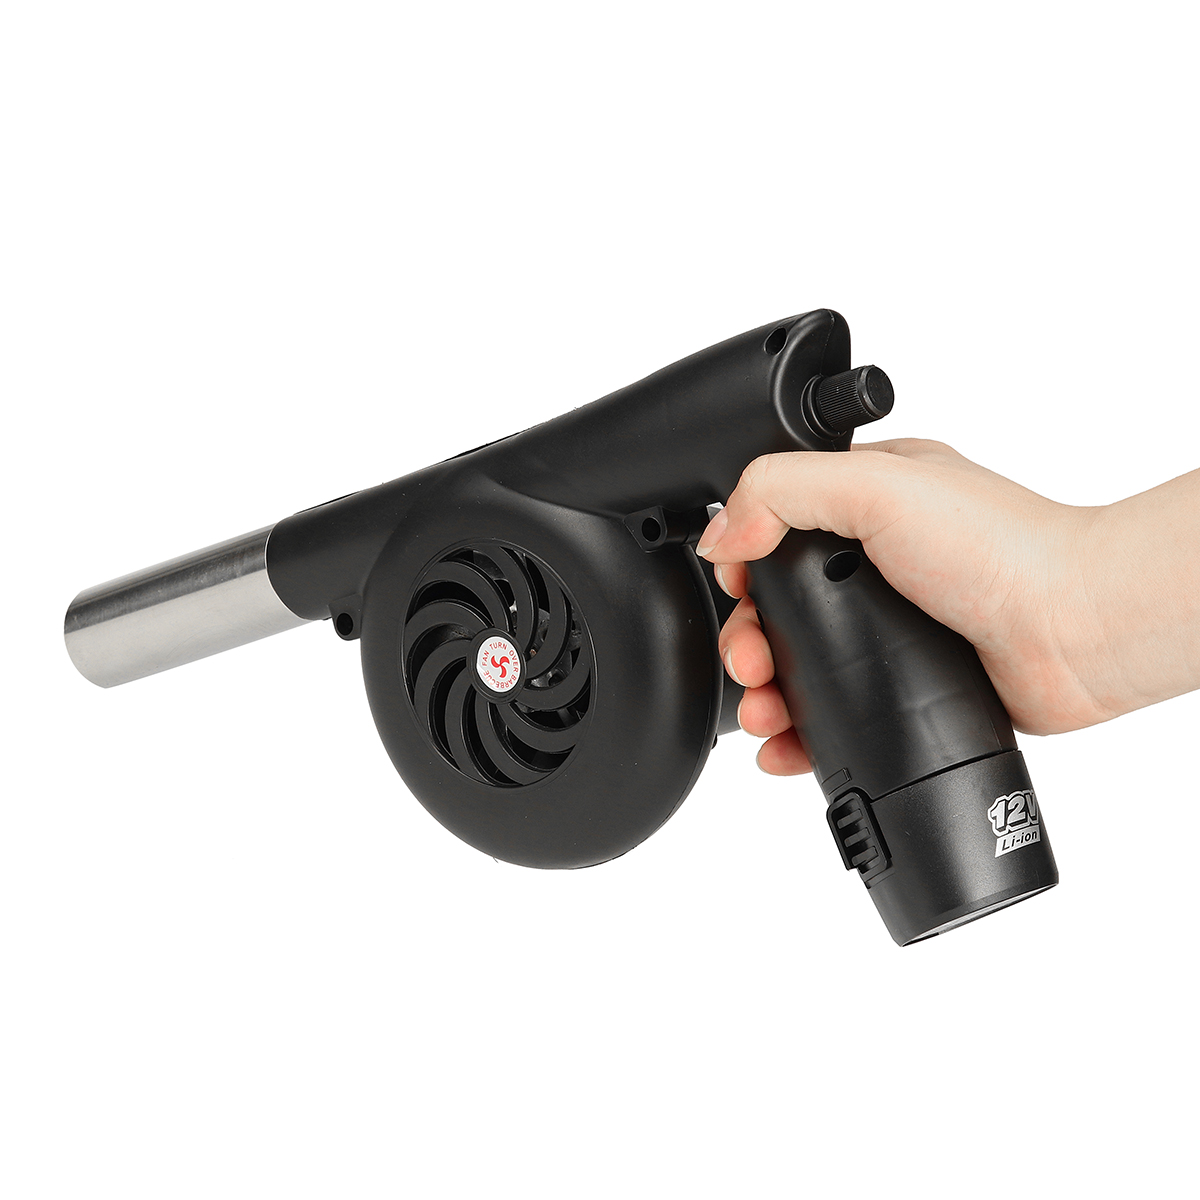 12V-20W-Cordless-Electric-Air-Blower-Handheld--Rechargeable-Leaf-Blower-Dust-Collector-for-Outdoor-B-1918610-9